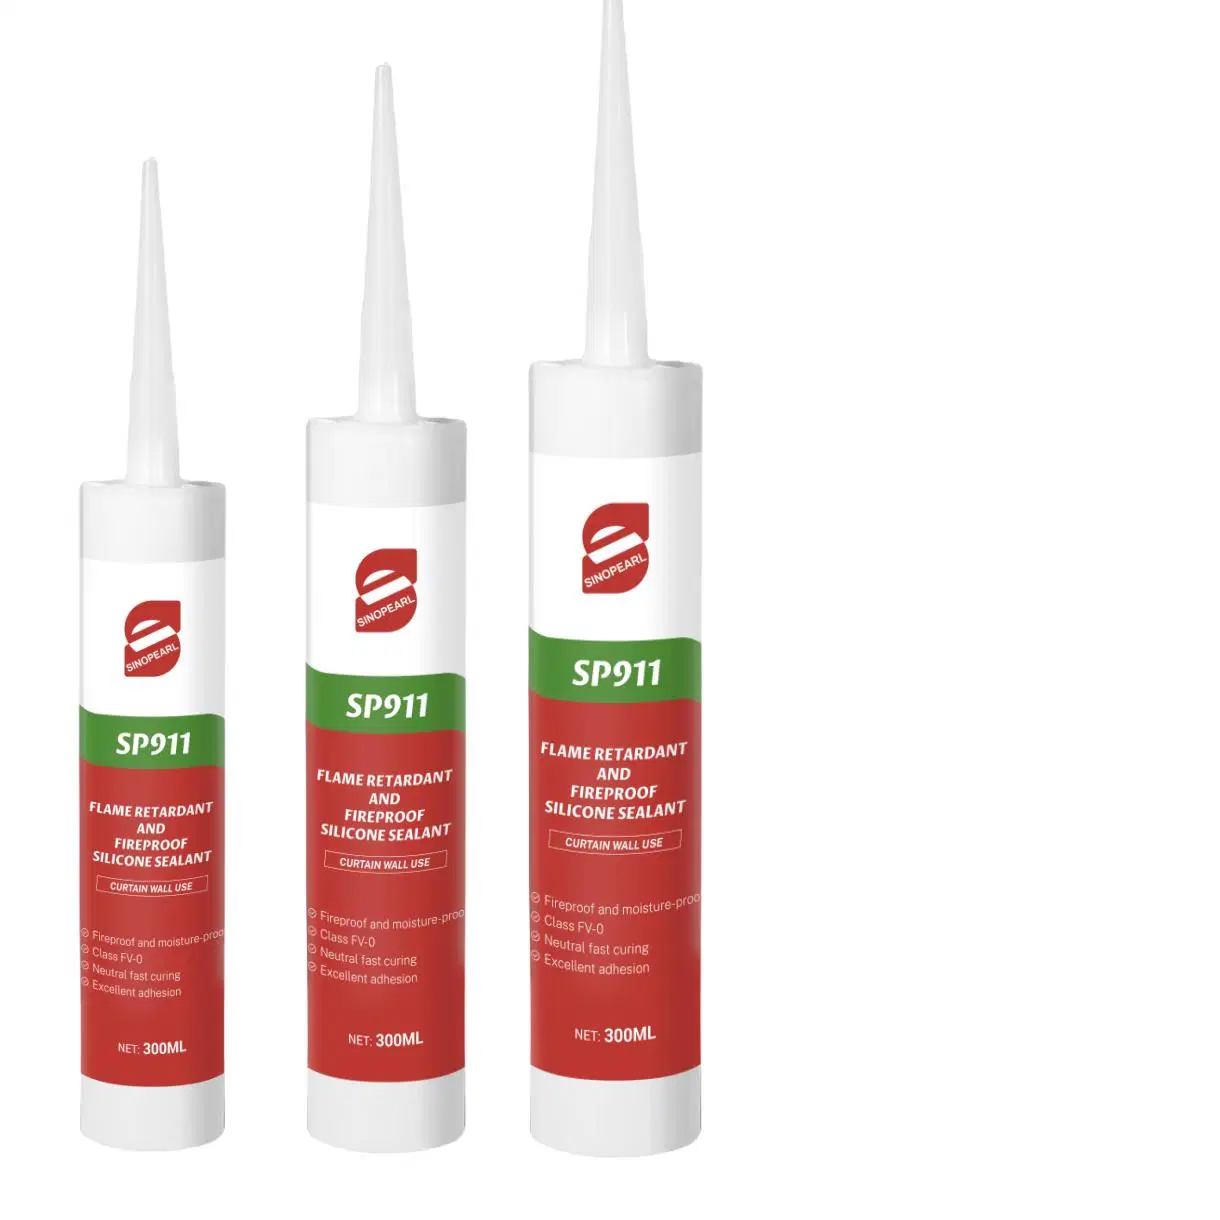 Sp911 Silicone Sealant Drying Fast and Strong Adhesive Fire Resistant Fireproof Silicone Sealant Window Glue